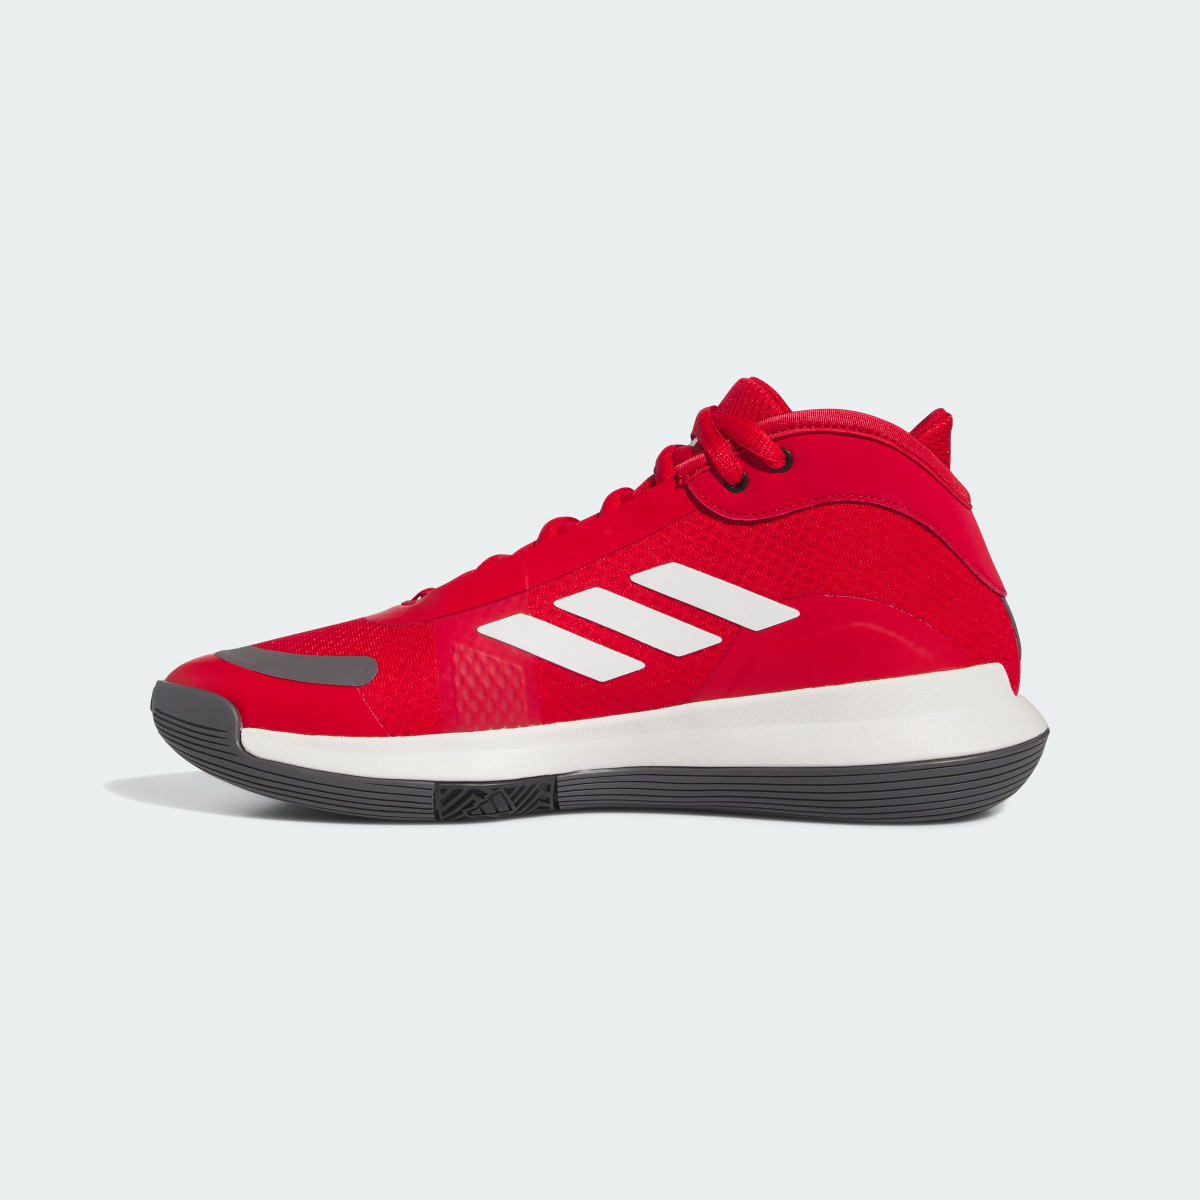 Adidas Bounce Legends Low Basketball Shoes. 9